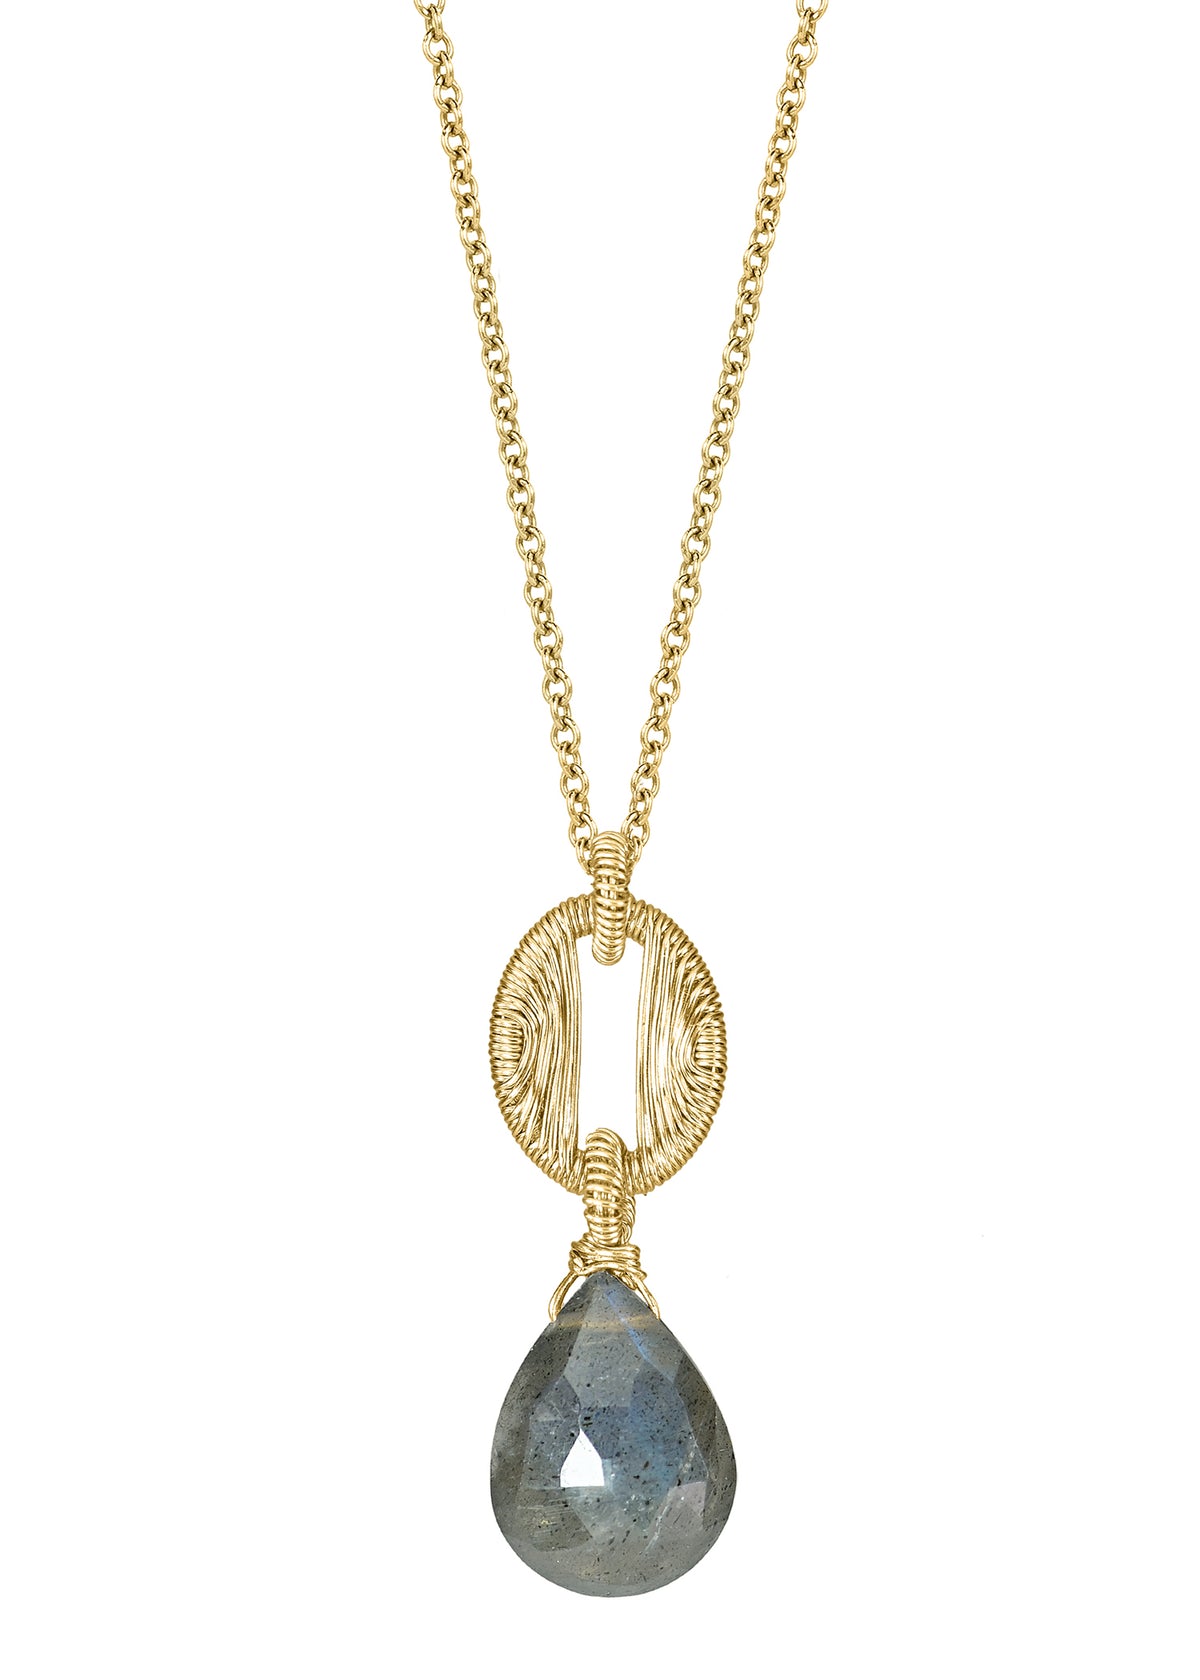 Labradorite 14k gold fill Necklace measures 17-1/4&quot; in length Pendant measures 1-1/8&quot; in length and 3/8&quot; in width at the widest point Handmade in our Los Angeles studio